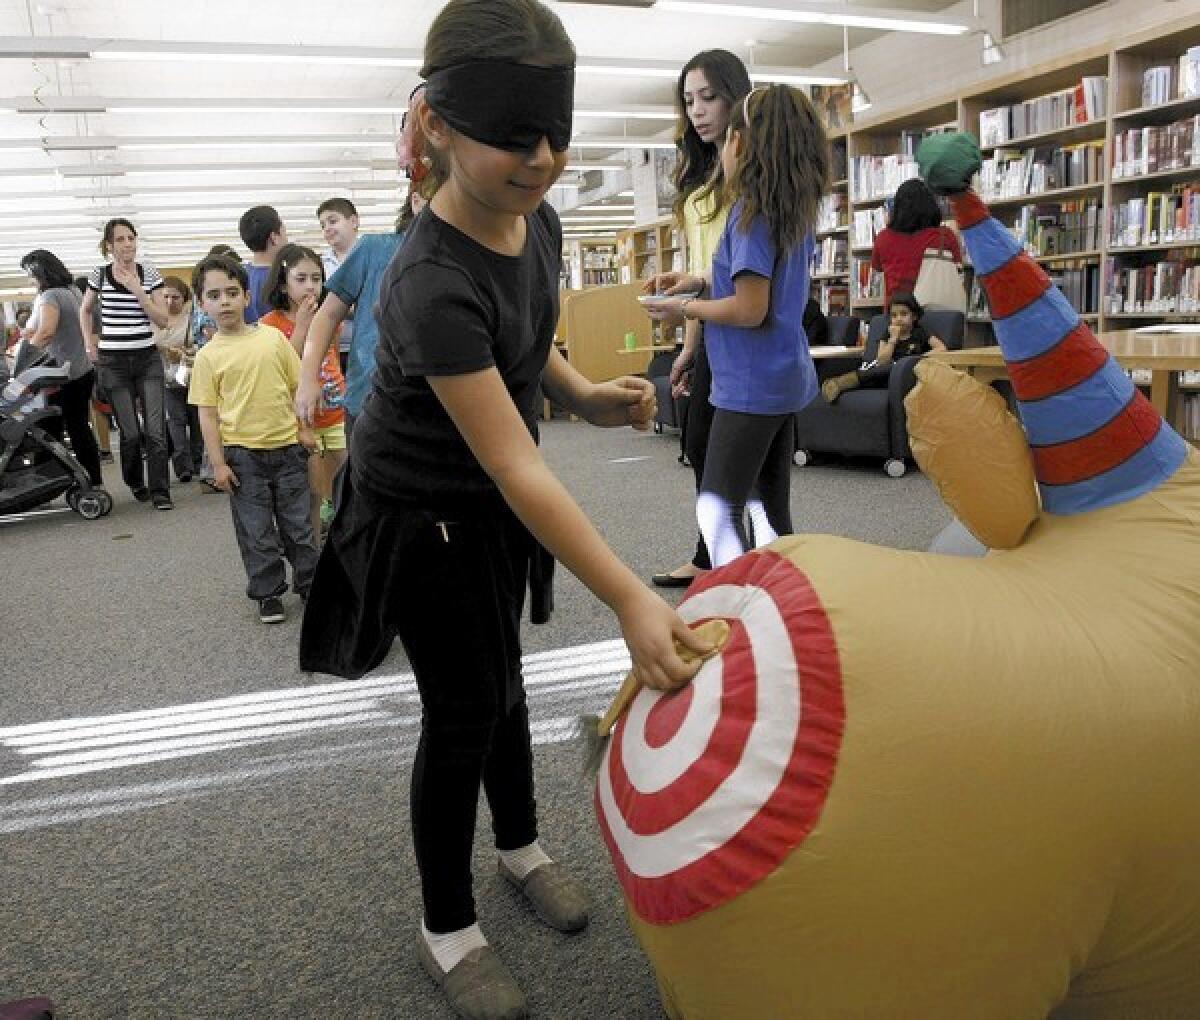 Stacey Torosian, 8, of Glendale, pins the tail on the donkey during the Grandview Library's 50th anniversary celebration at the library on Friday, Jan. 17, 2014.